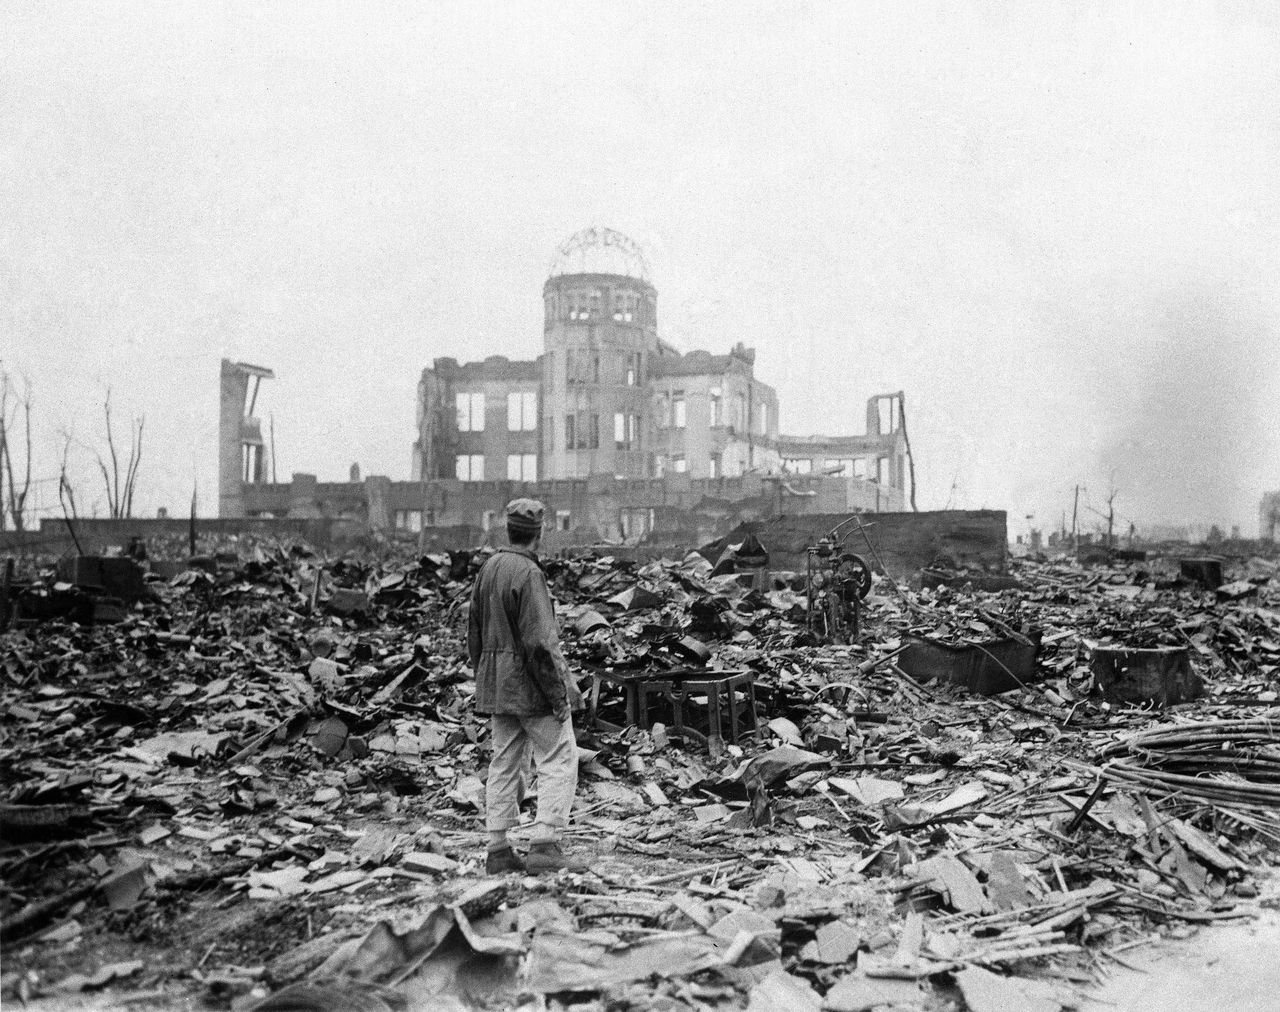 This Sept. 8, 1945, picture shows an allied correspondent standing in the rubble in front of the shell of a building that once was a movie theater in Hiroshima, Japan, a month after the first atomic bomb ever used in warfare was dropped by the U.S.